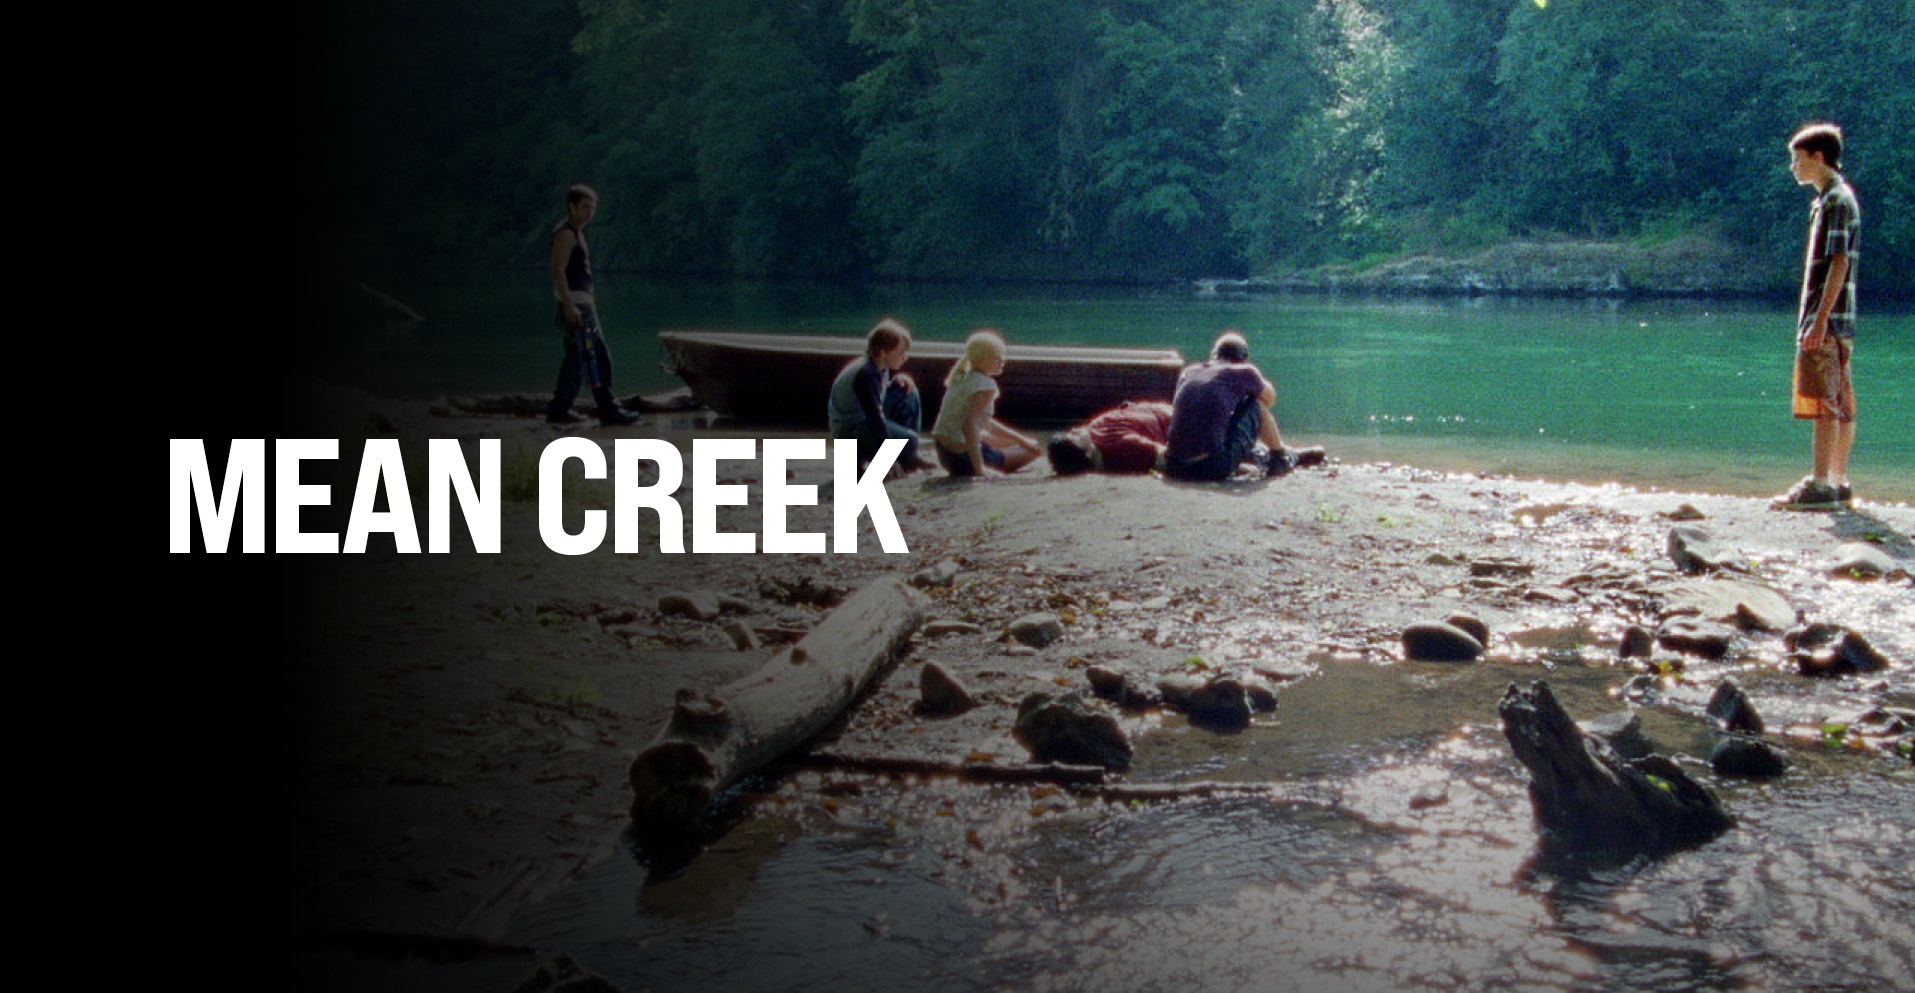 35-facts-about-the-movie-mean-creek